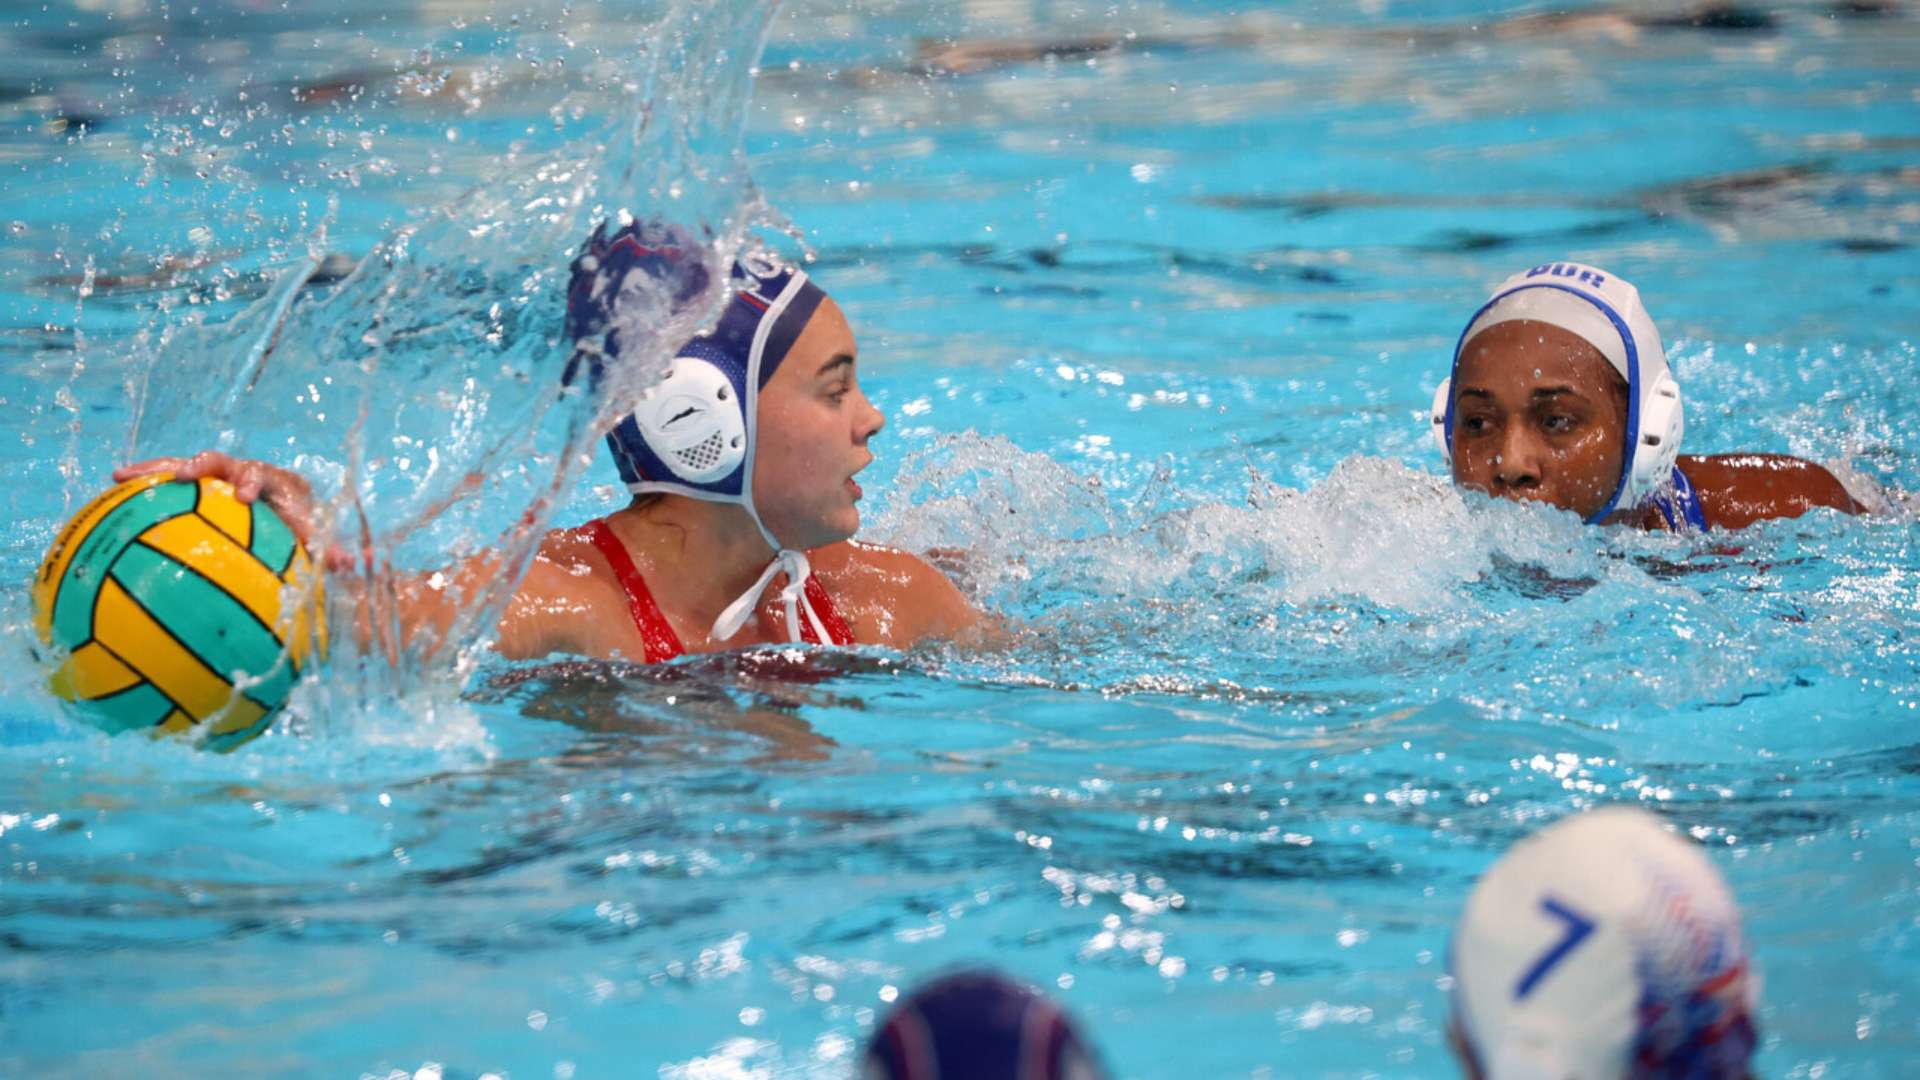 Female Water Polo: Chile comes close but loses to Puerto Rico